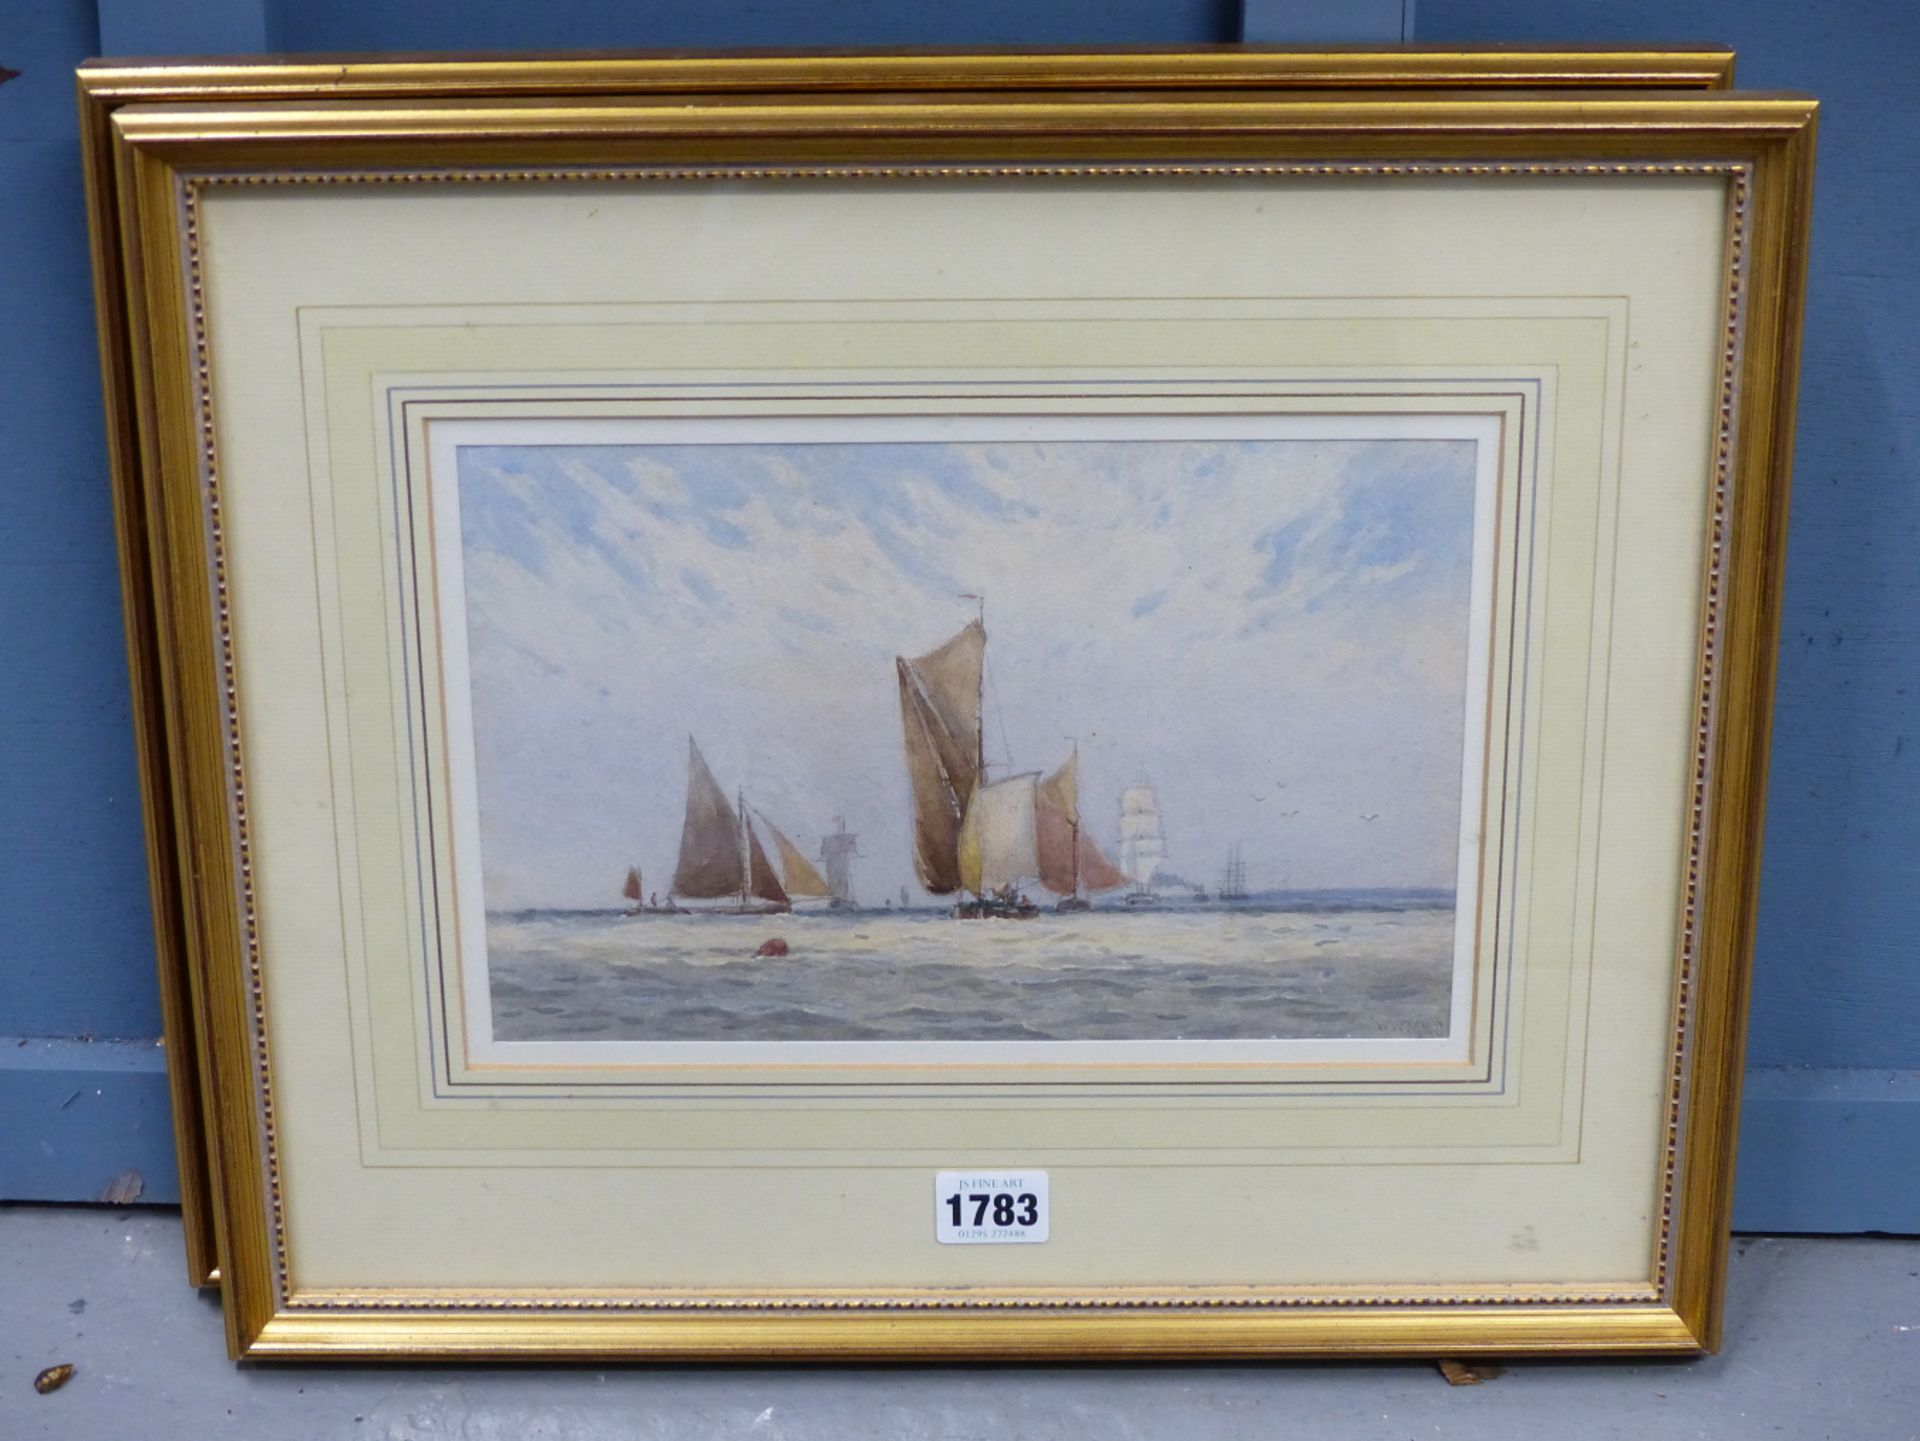 WALTER WILLIAM MAY (1831-1896), A PAIR OF WATERCOLOURS OF SHIPPING SCENES, BOTH SIGNED, 26 X 16.5CM. - Image 3 of 5